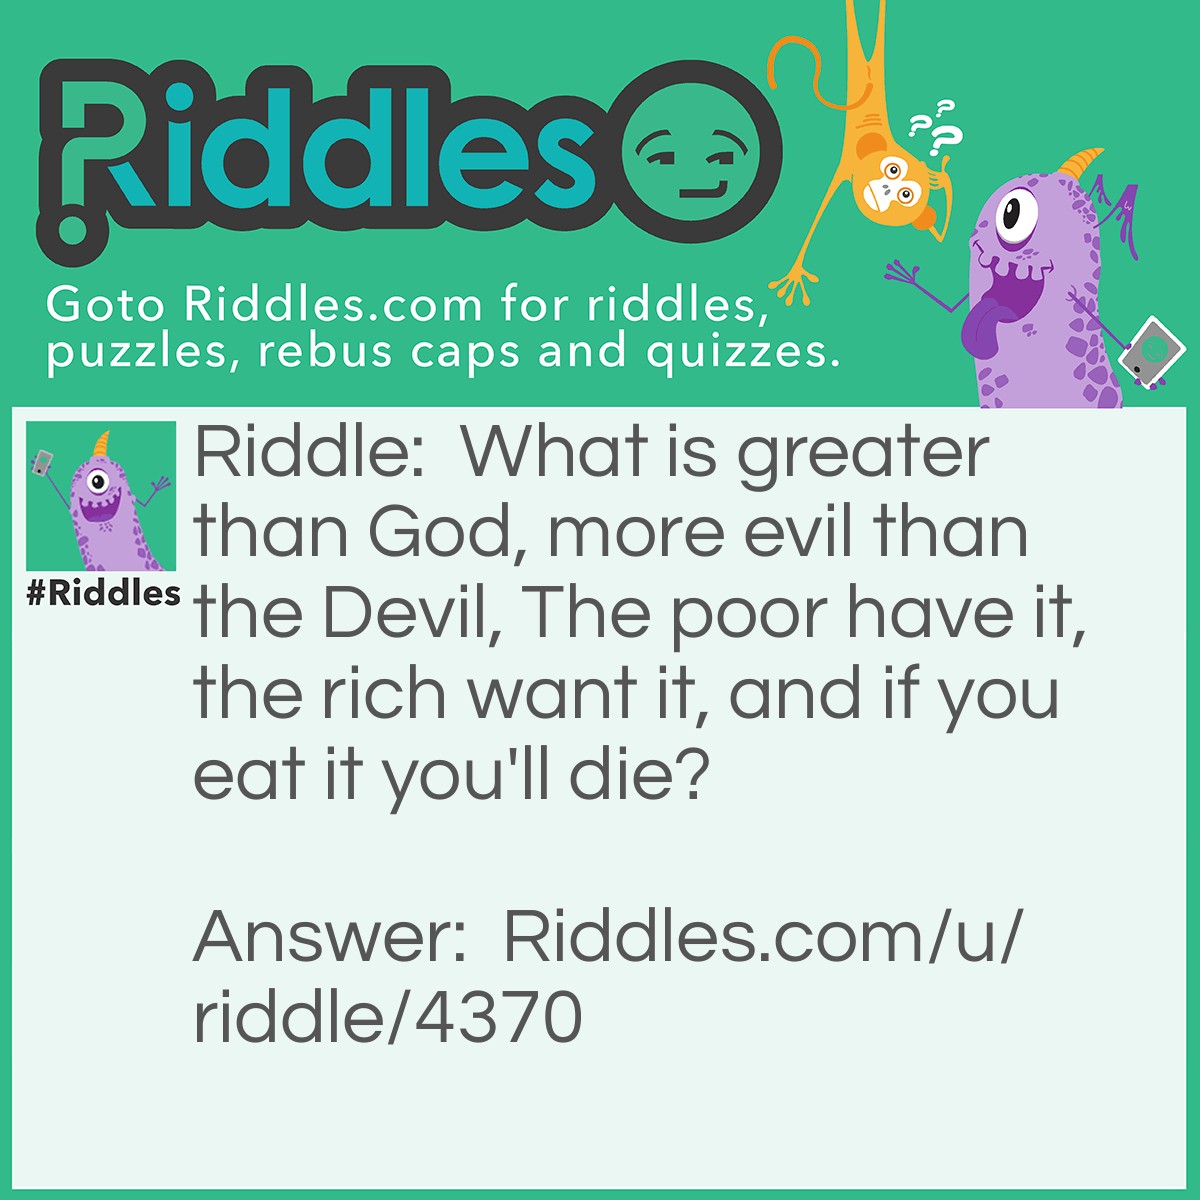 Riddle: What is greater than God, more evil than the Devil, The poor have it, the rich want it, and if you eat it you'll die? Answer: Nothing.